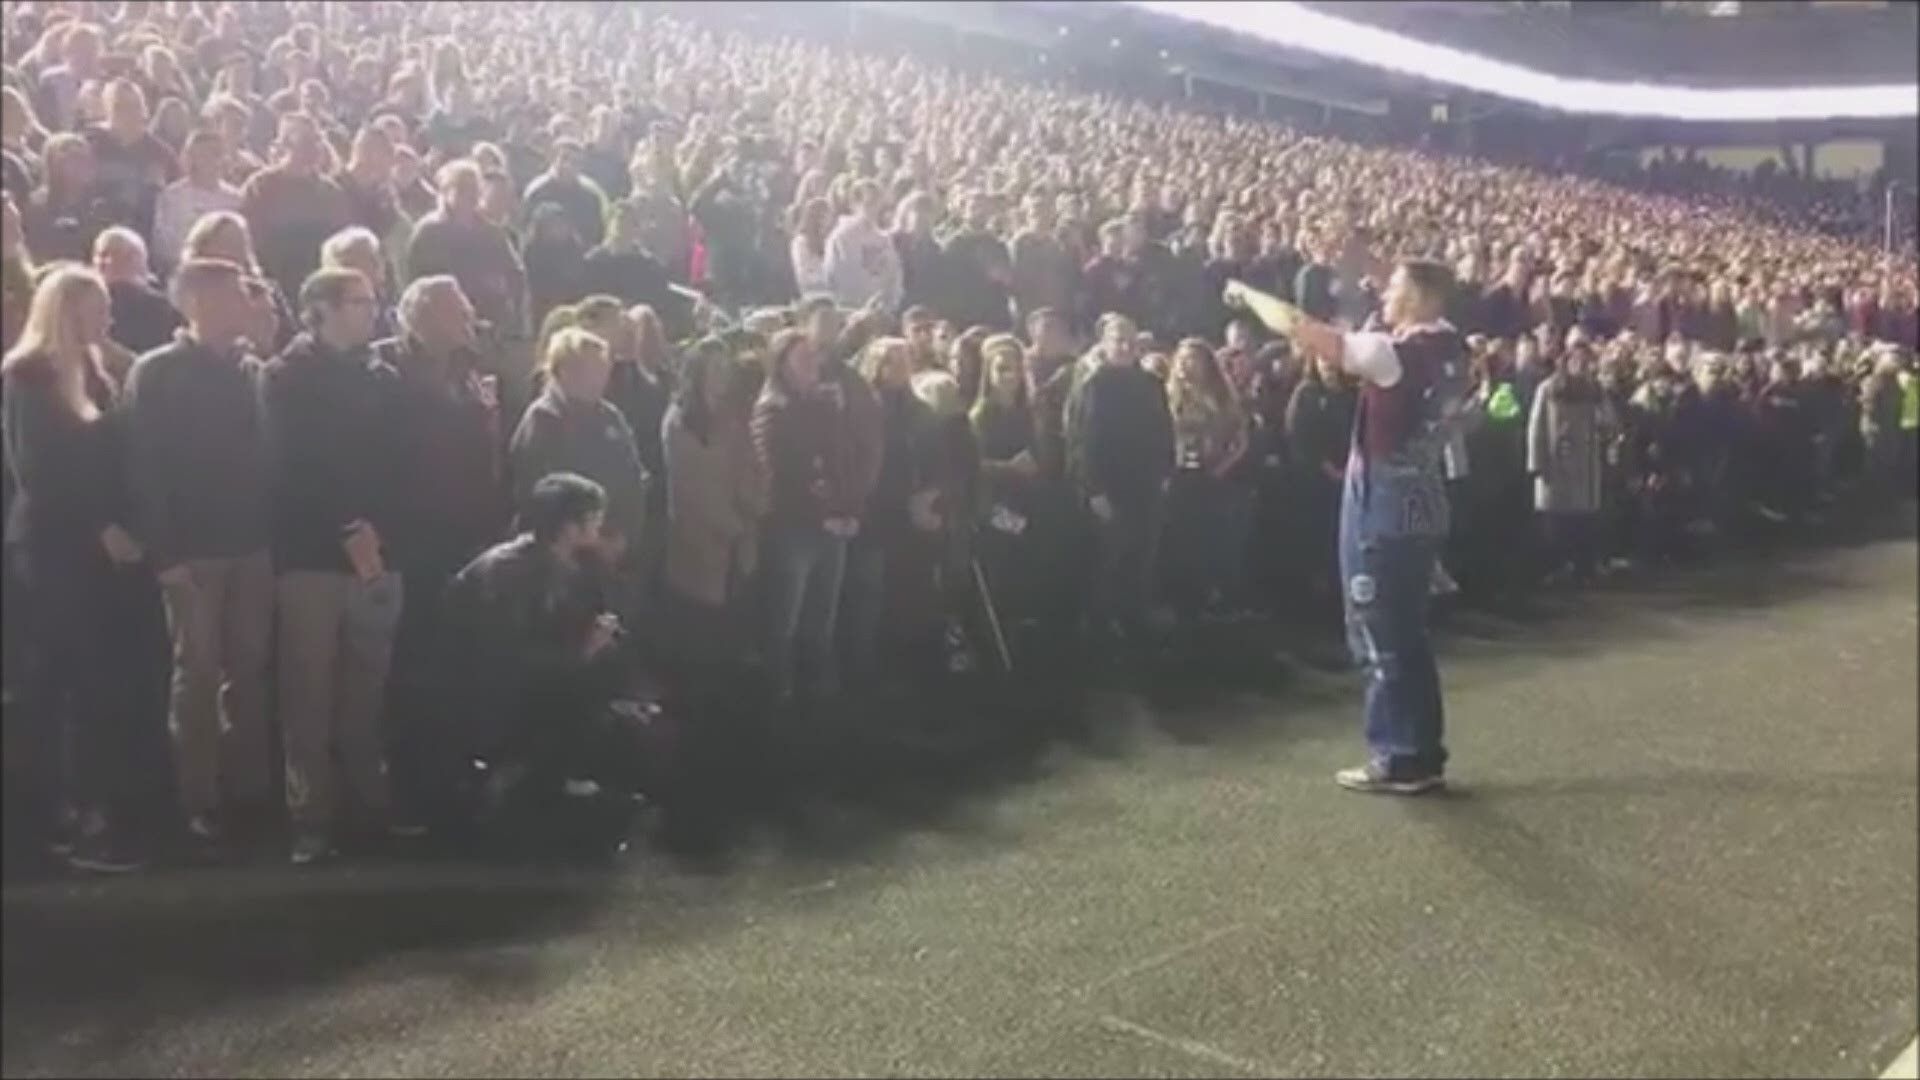 'Spirit of Aggieland' at the final Midnight Yell of the '19 season. To see our coverage of the final Yell, head to our YouTube page and check it out!